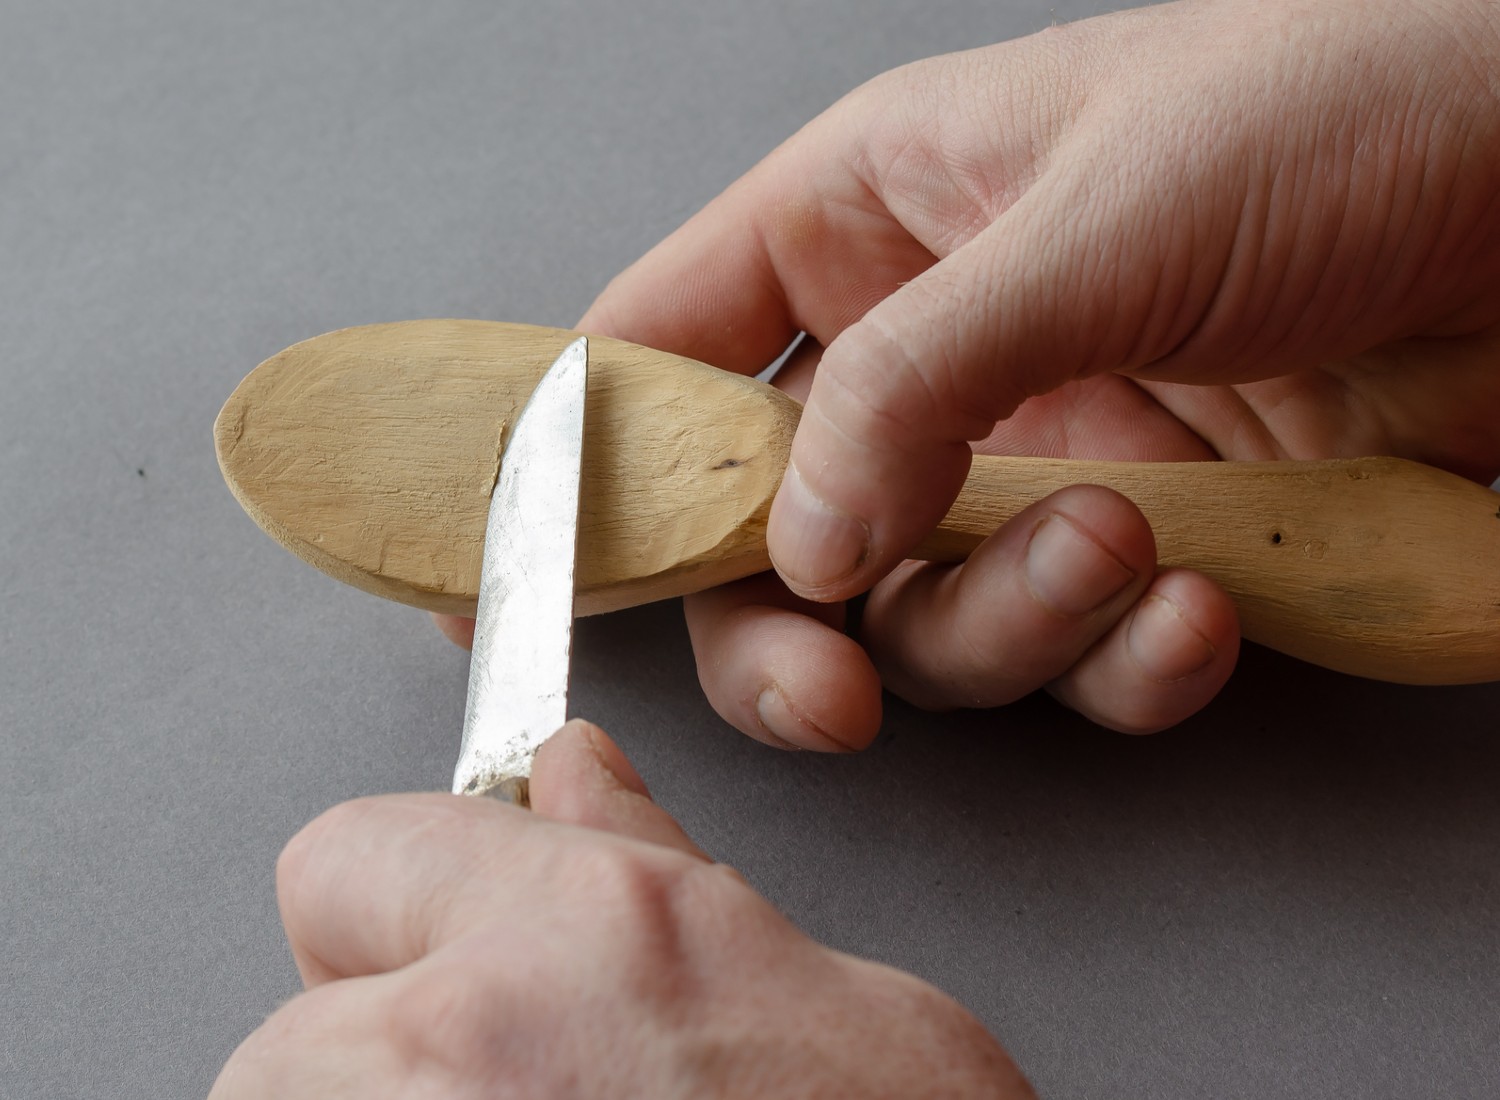 Man carving a wooden spoon